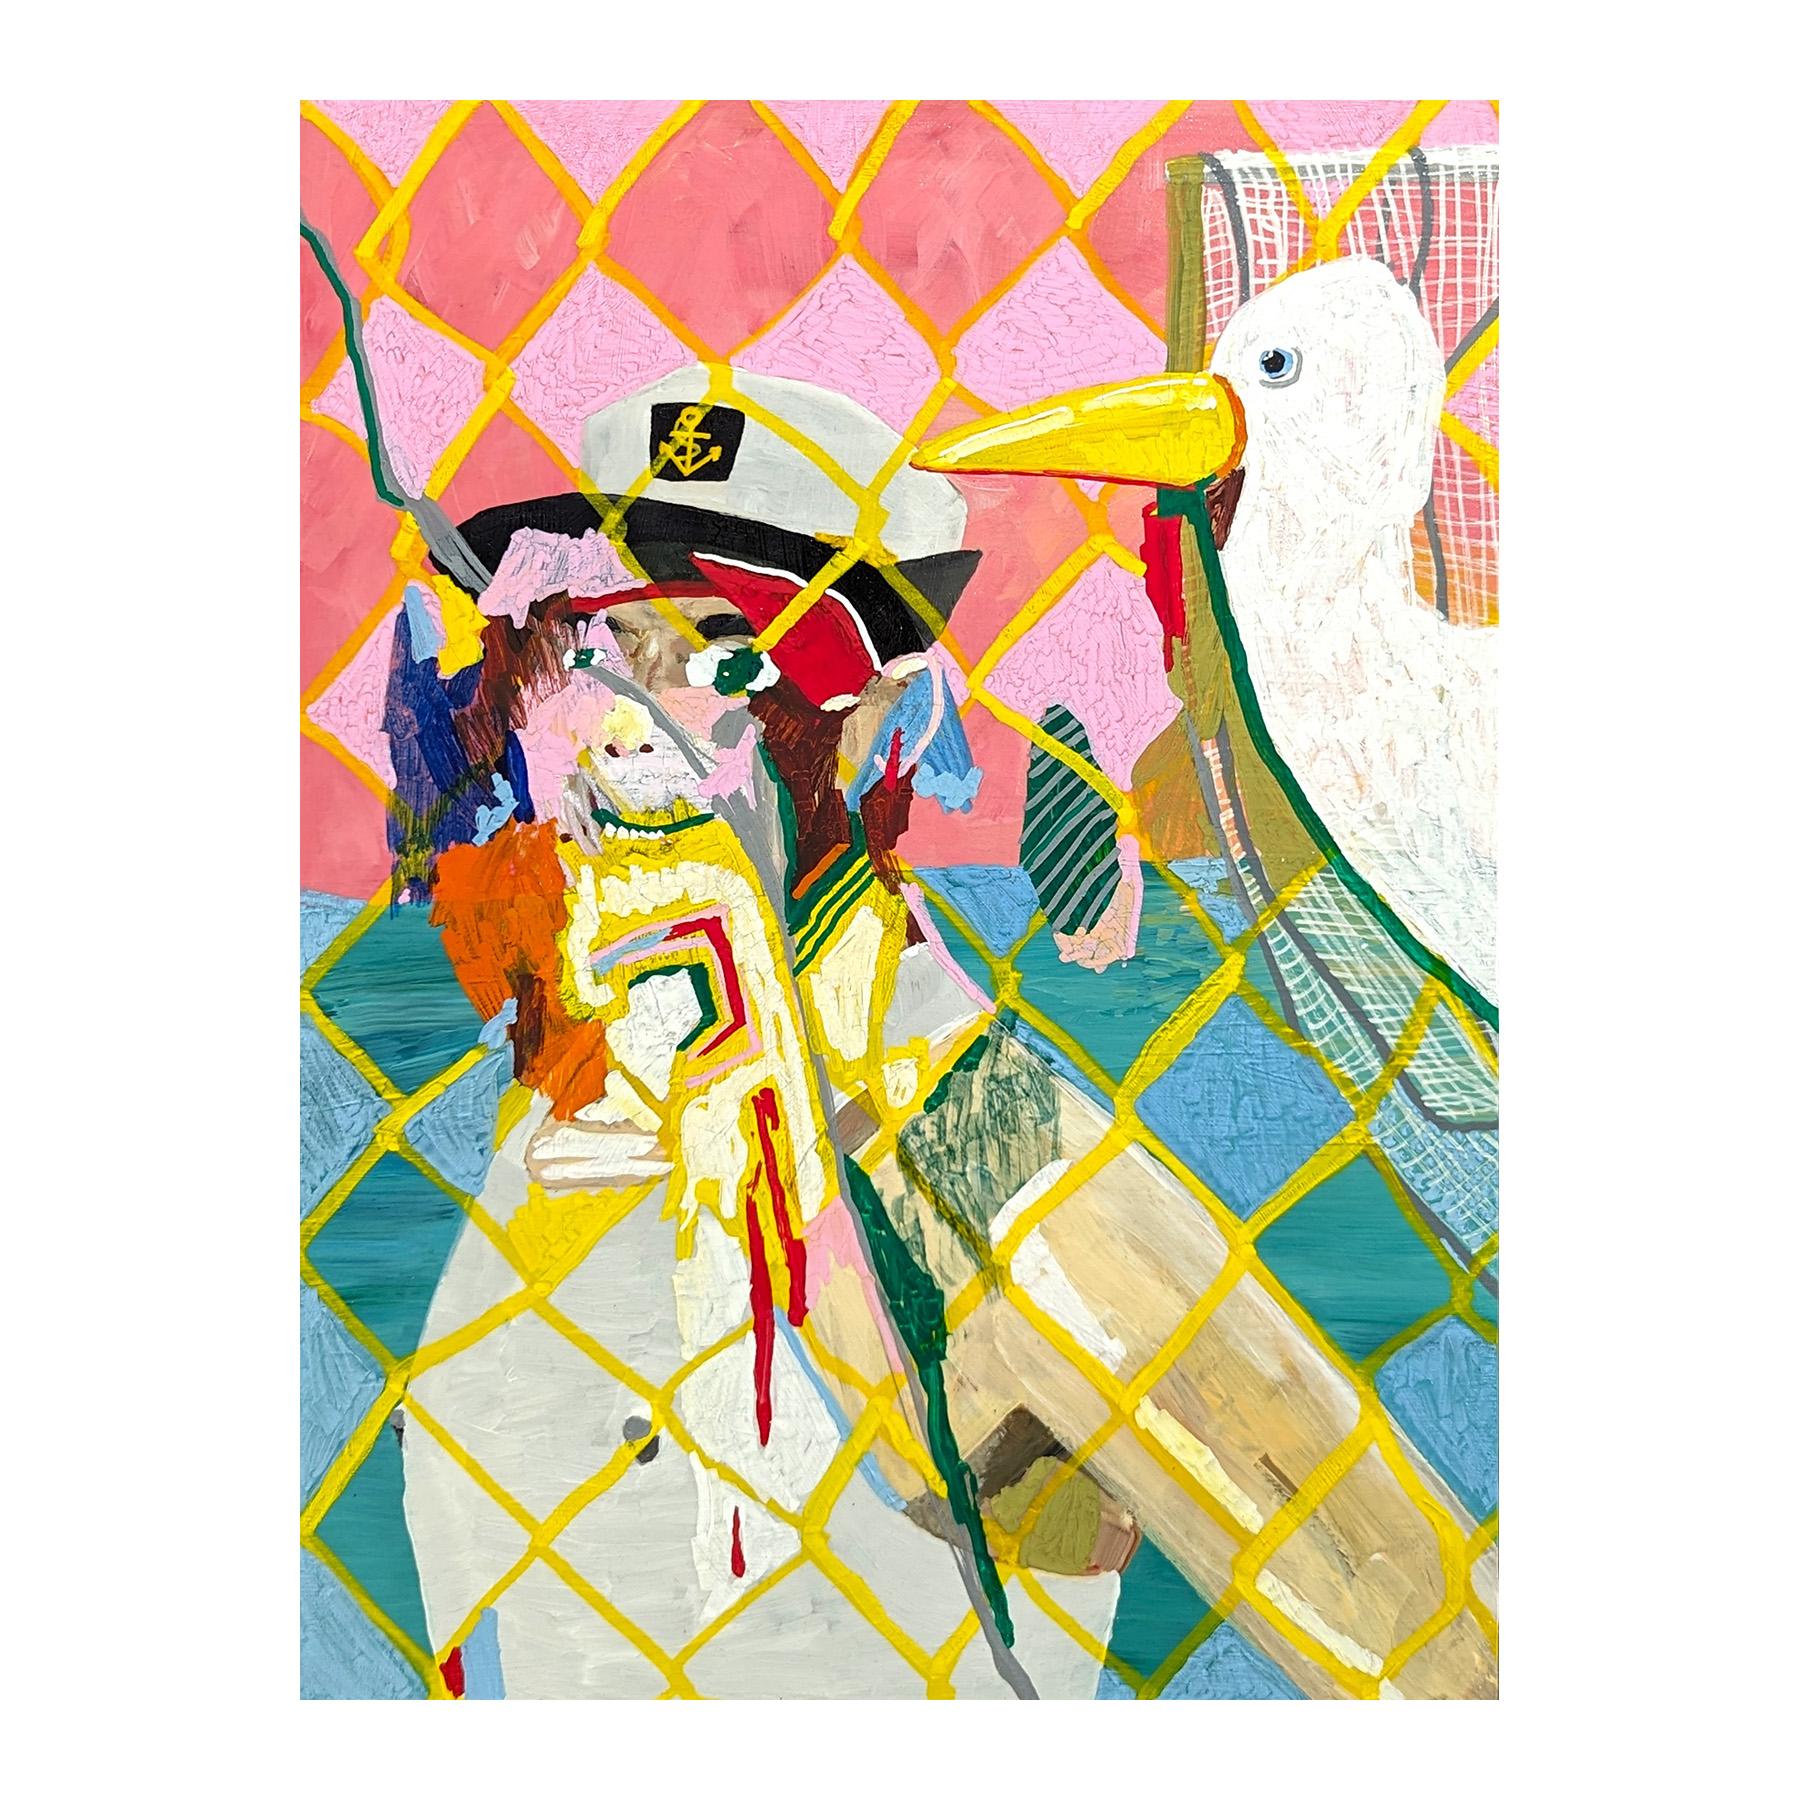 Colorful surrealistic painting by Memphis-based contemporary artist Alex Paulus. The work features a distorted figure in a captain hat set next to a white sea bird. The yellow diamond pattern across the work gives the illusion that the scene is